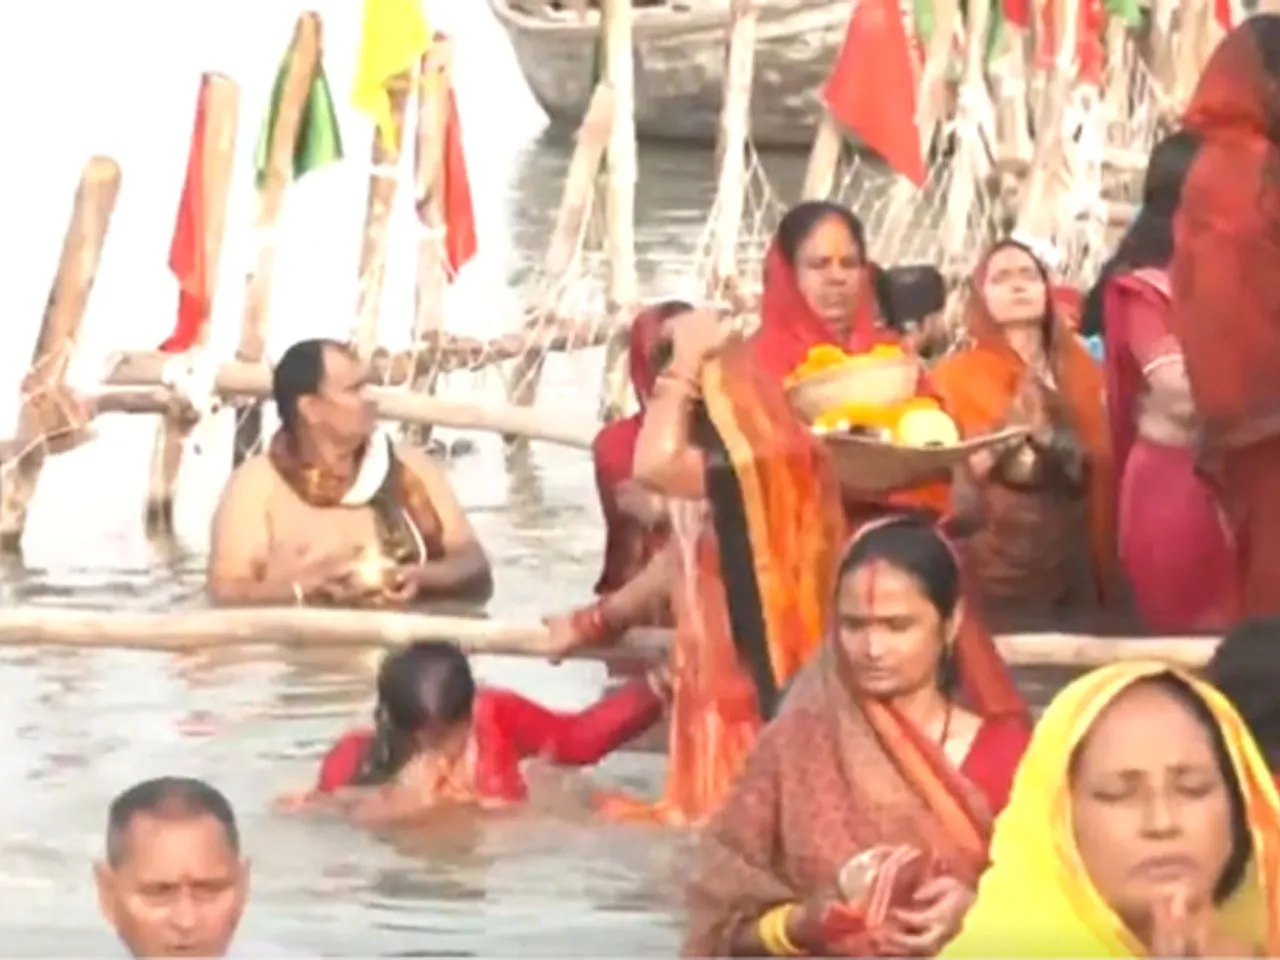 Many people gather at the Ganga Ghat on the occasion of Chhat Puja